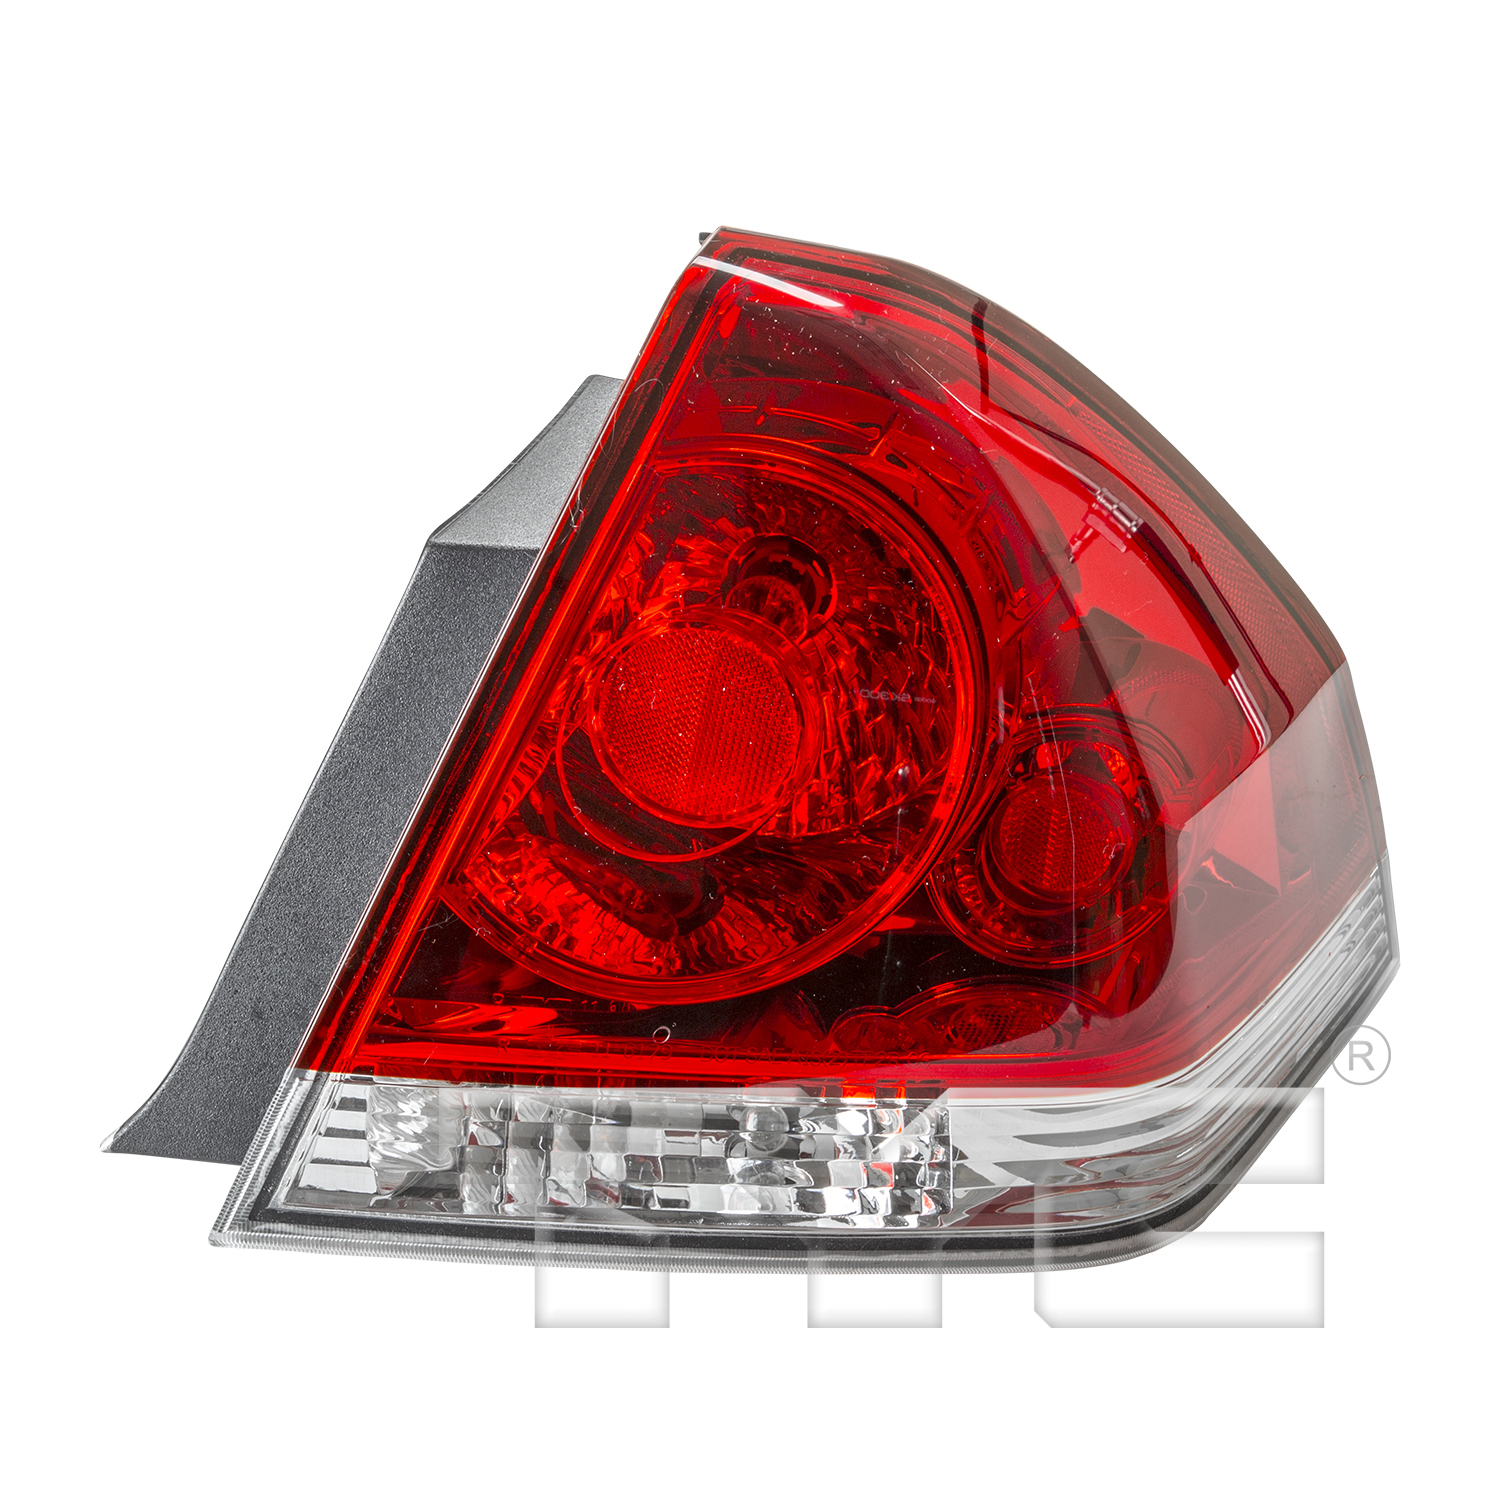 Aftermarket TAILLIGHTS for CHEVROLET - IMPALA LIMITED, IMPALA LIMITED,14-16,RT Taillamp assy